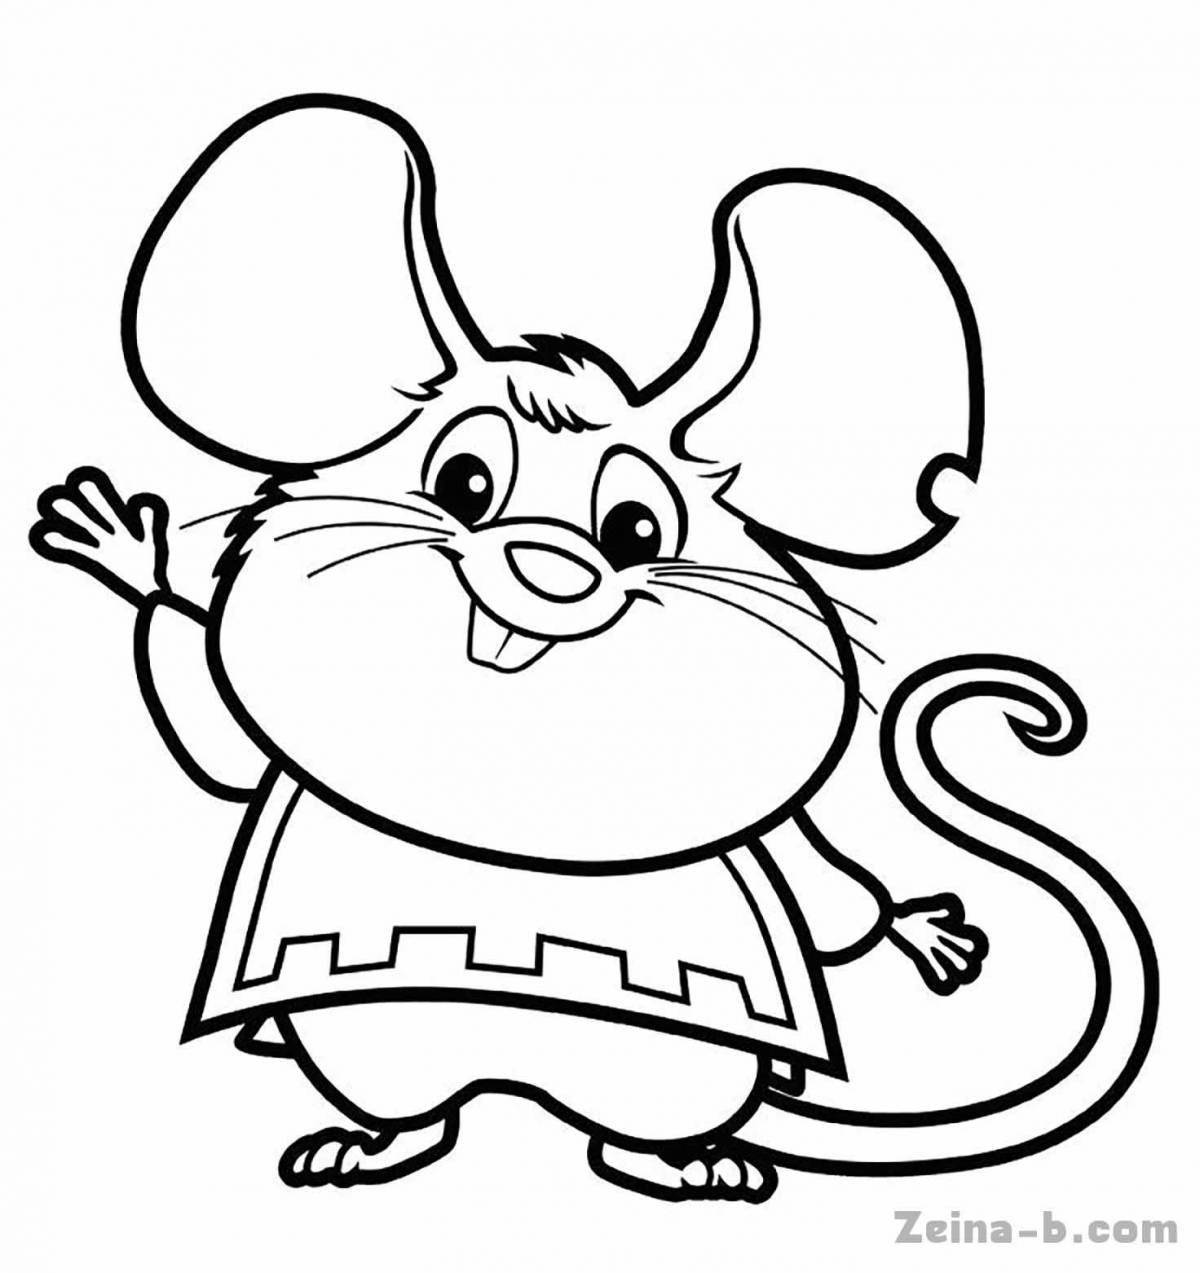 Outstanding mouse coloring book for 3-4 year olds